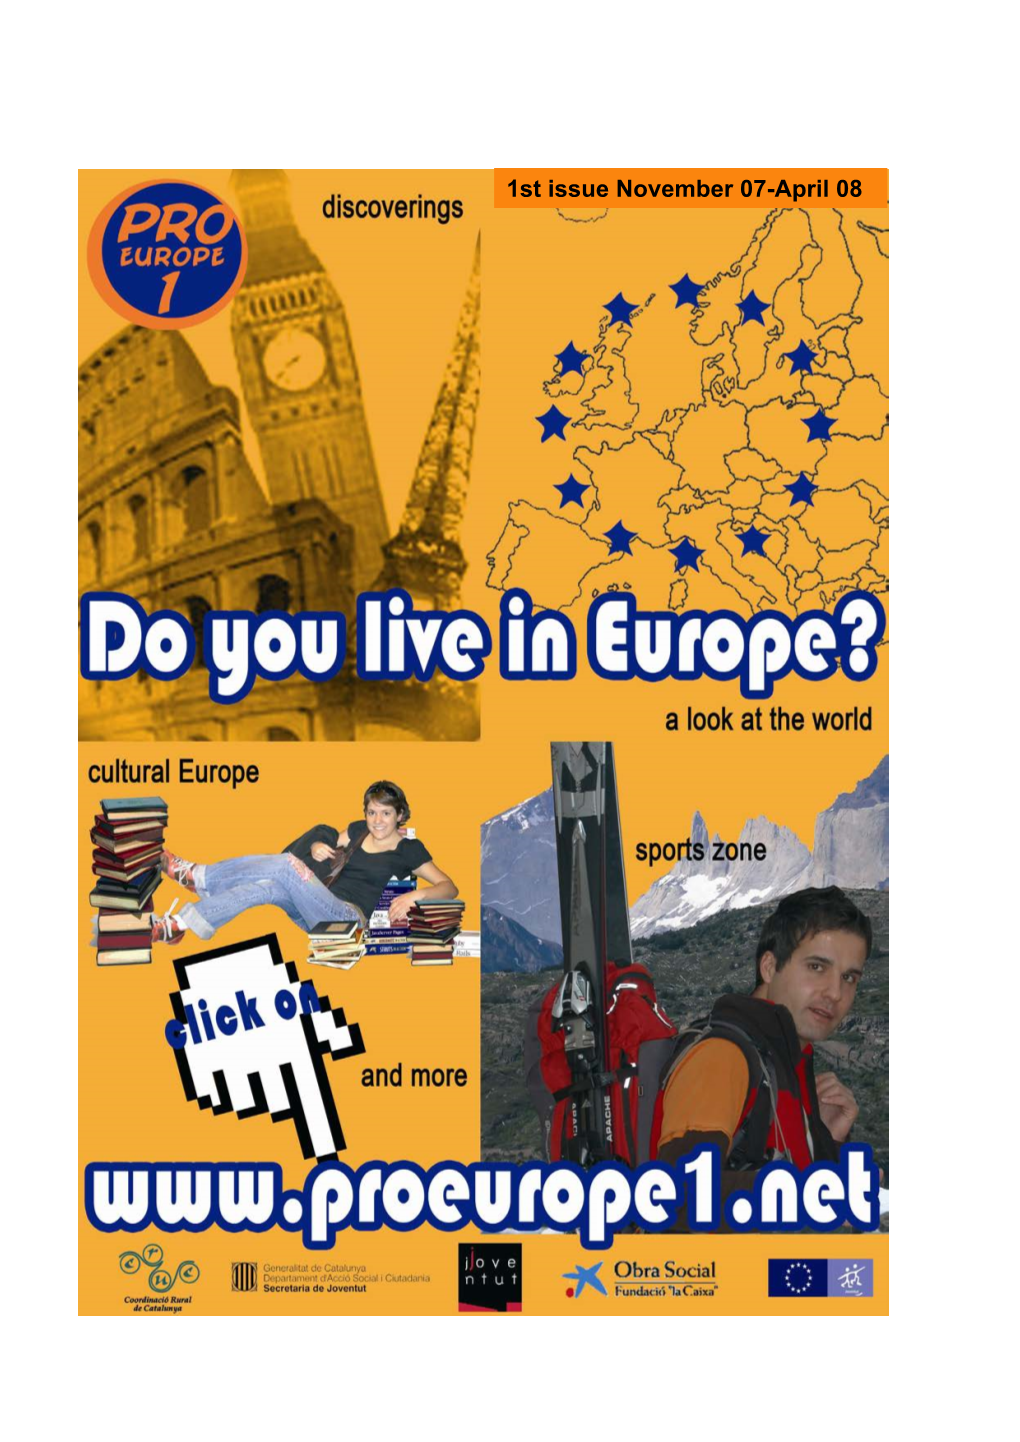 Proeurope1 Is the Guide Magazine Online Where You Can Find The